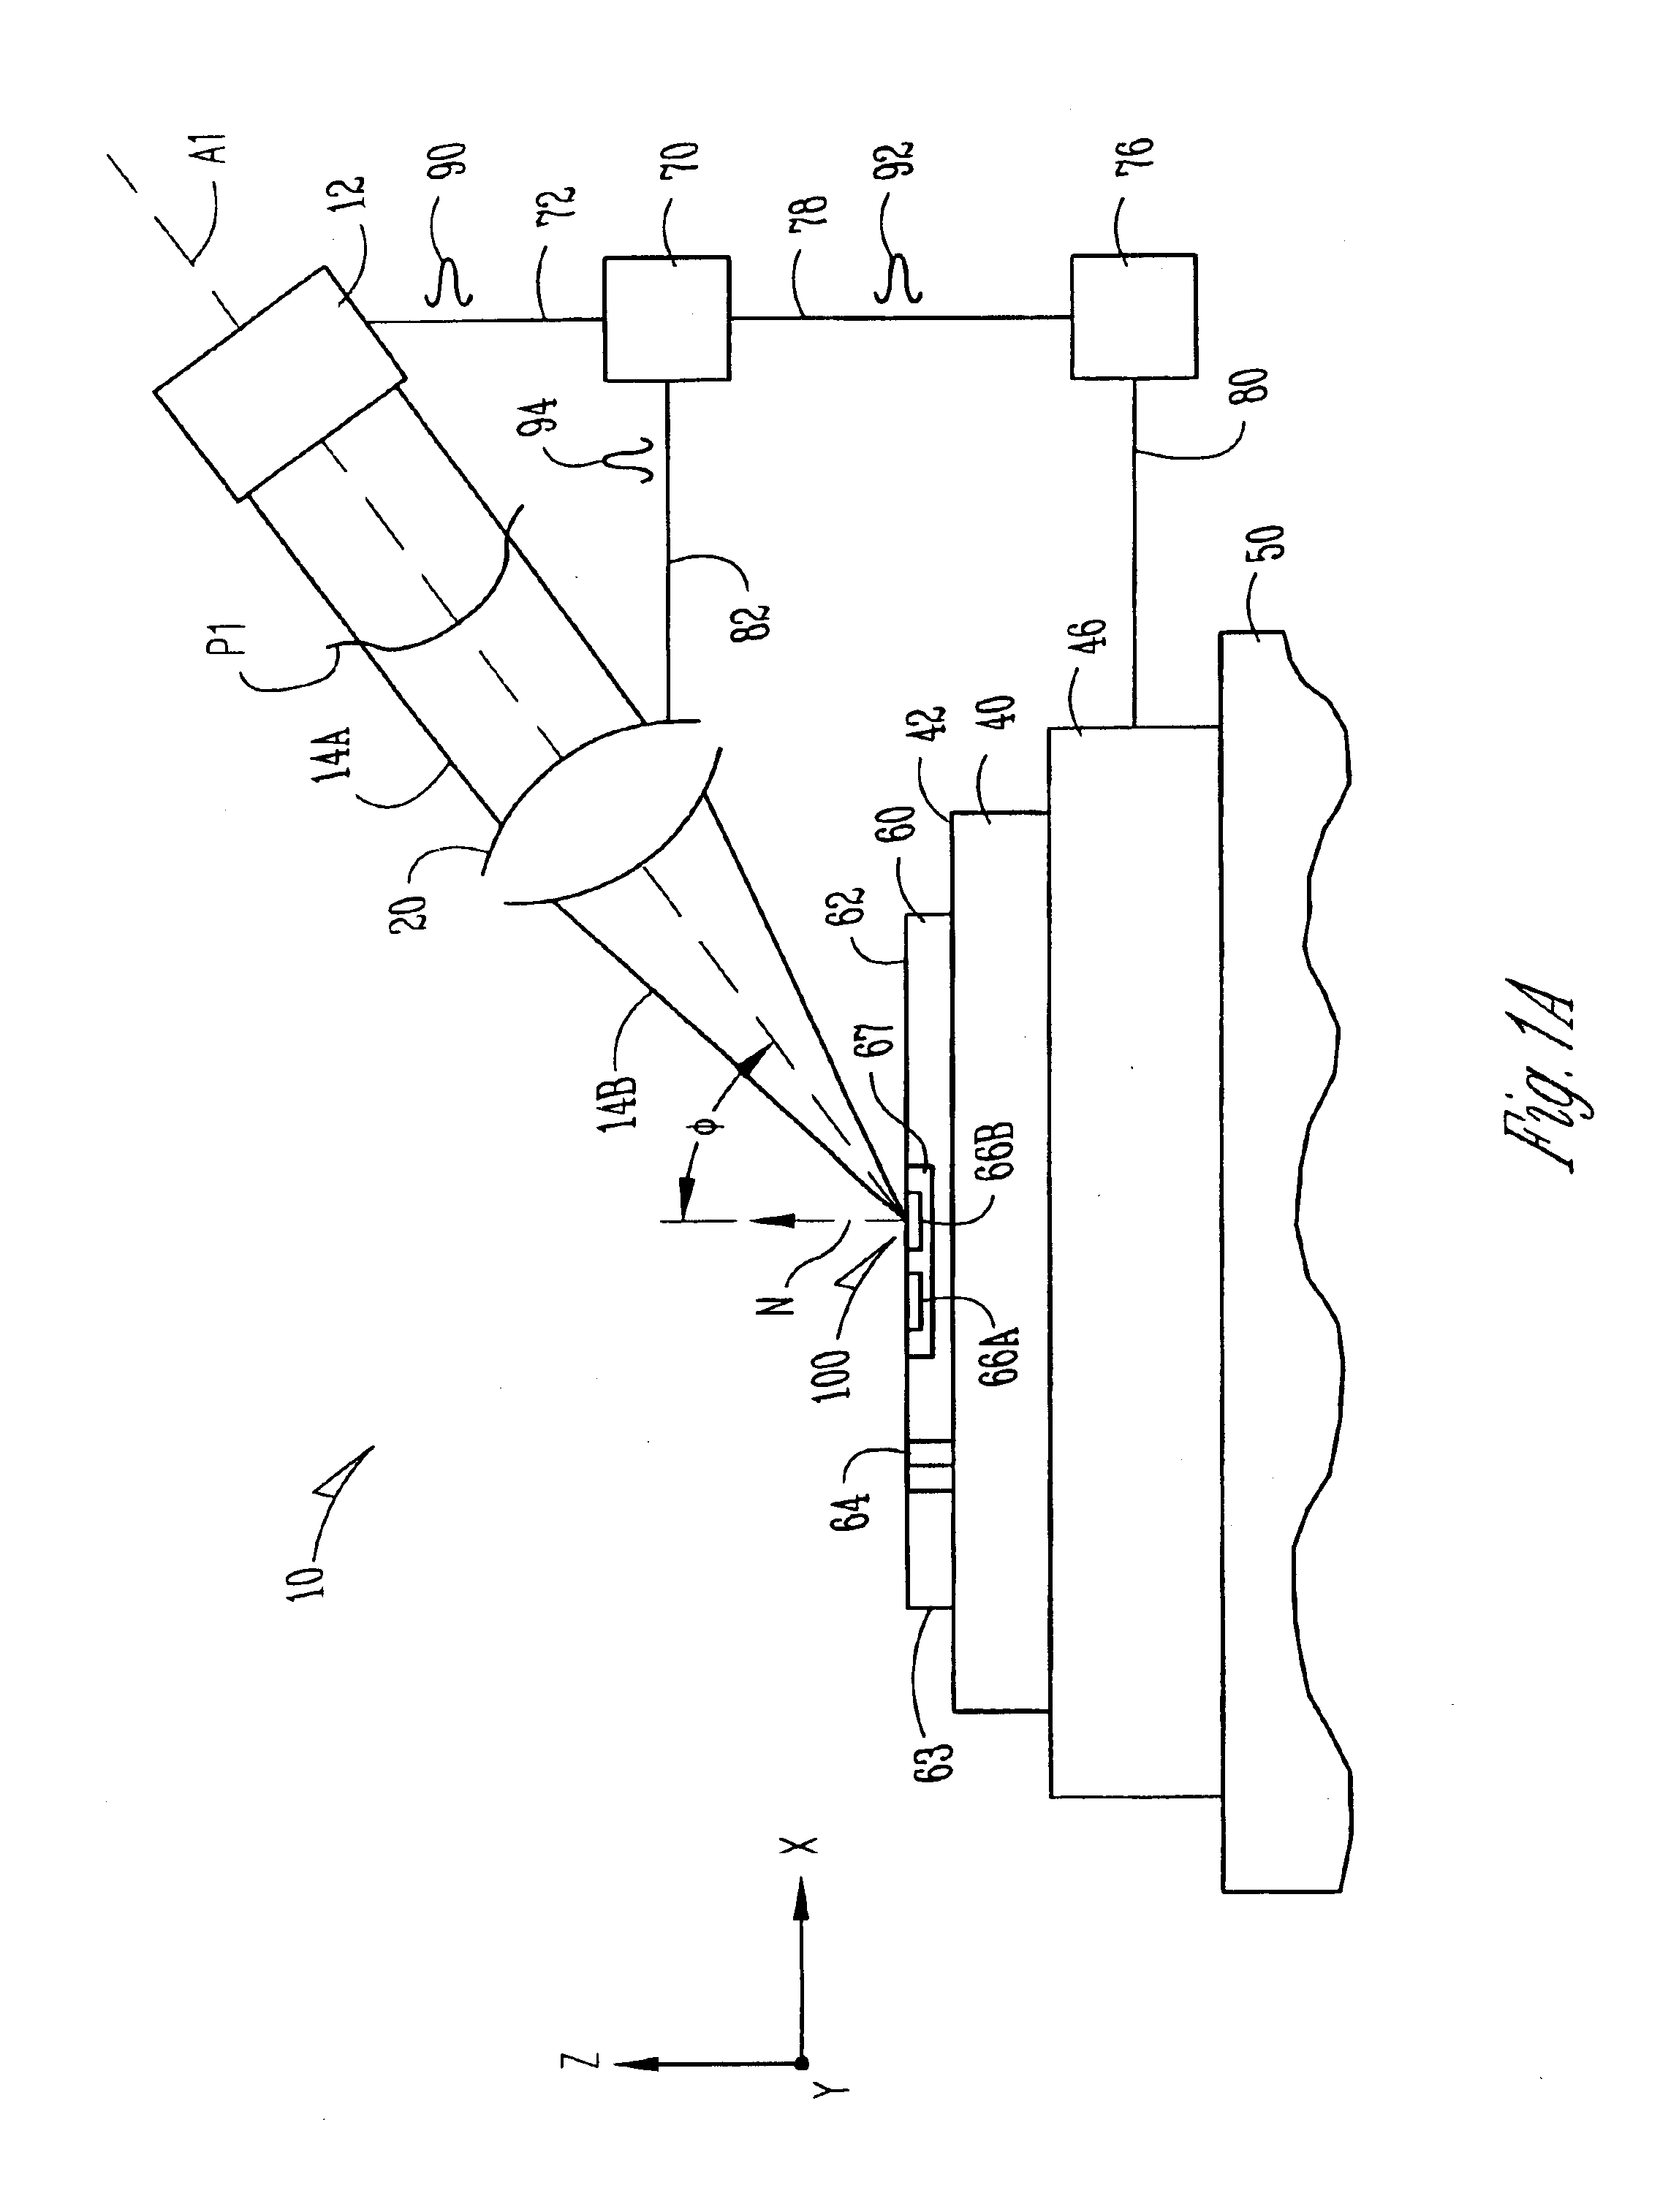 Laser scanning apparatus and methods for thermal processing